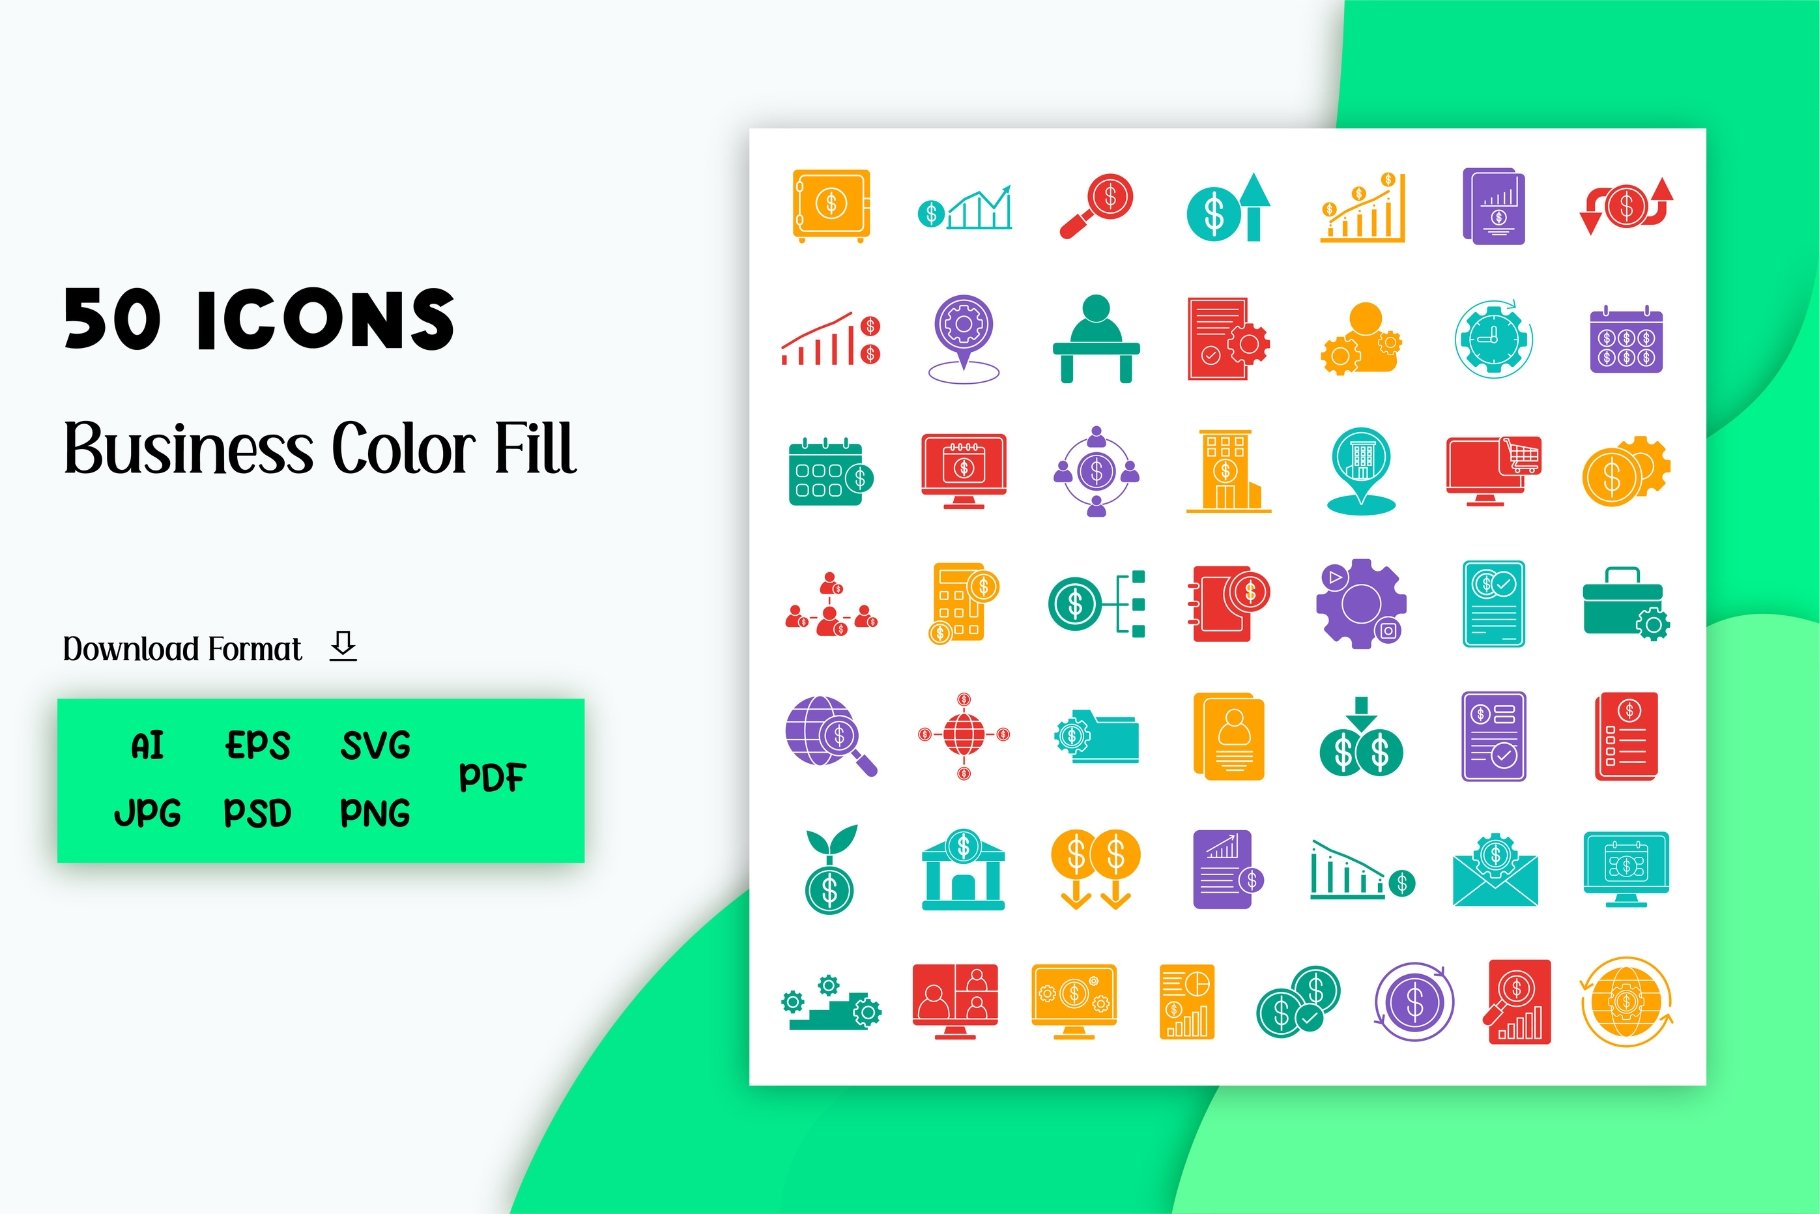 Icon Pack: Business Color (50 Icons) cover image.